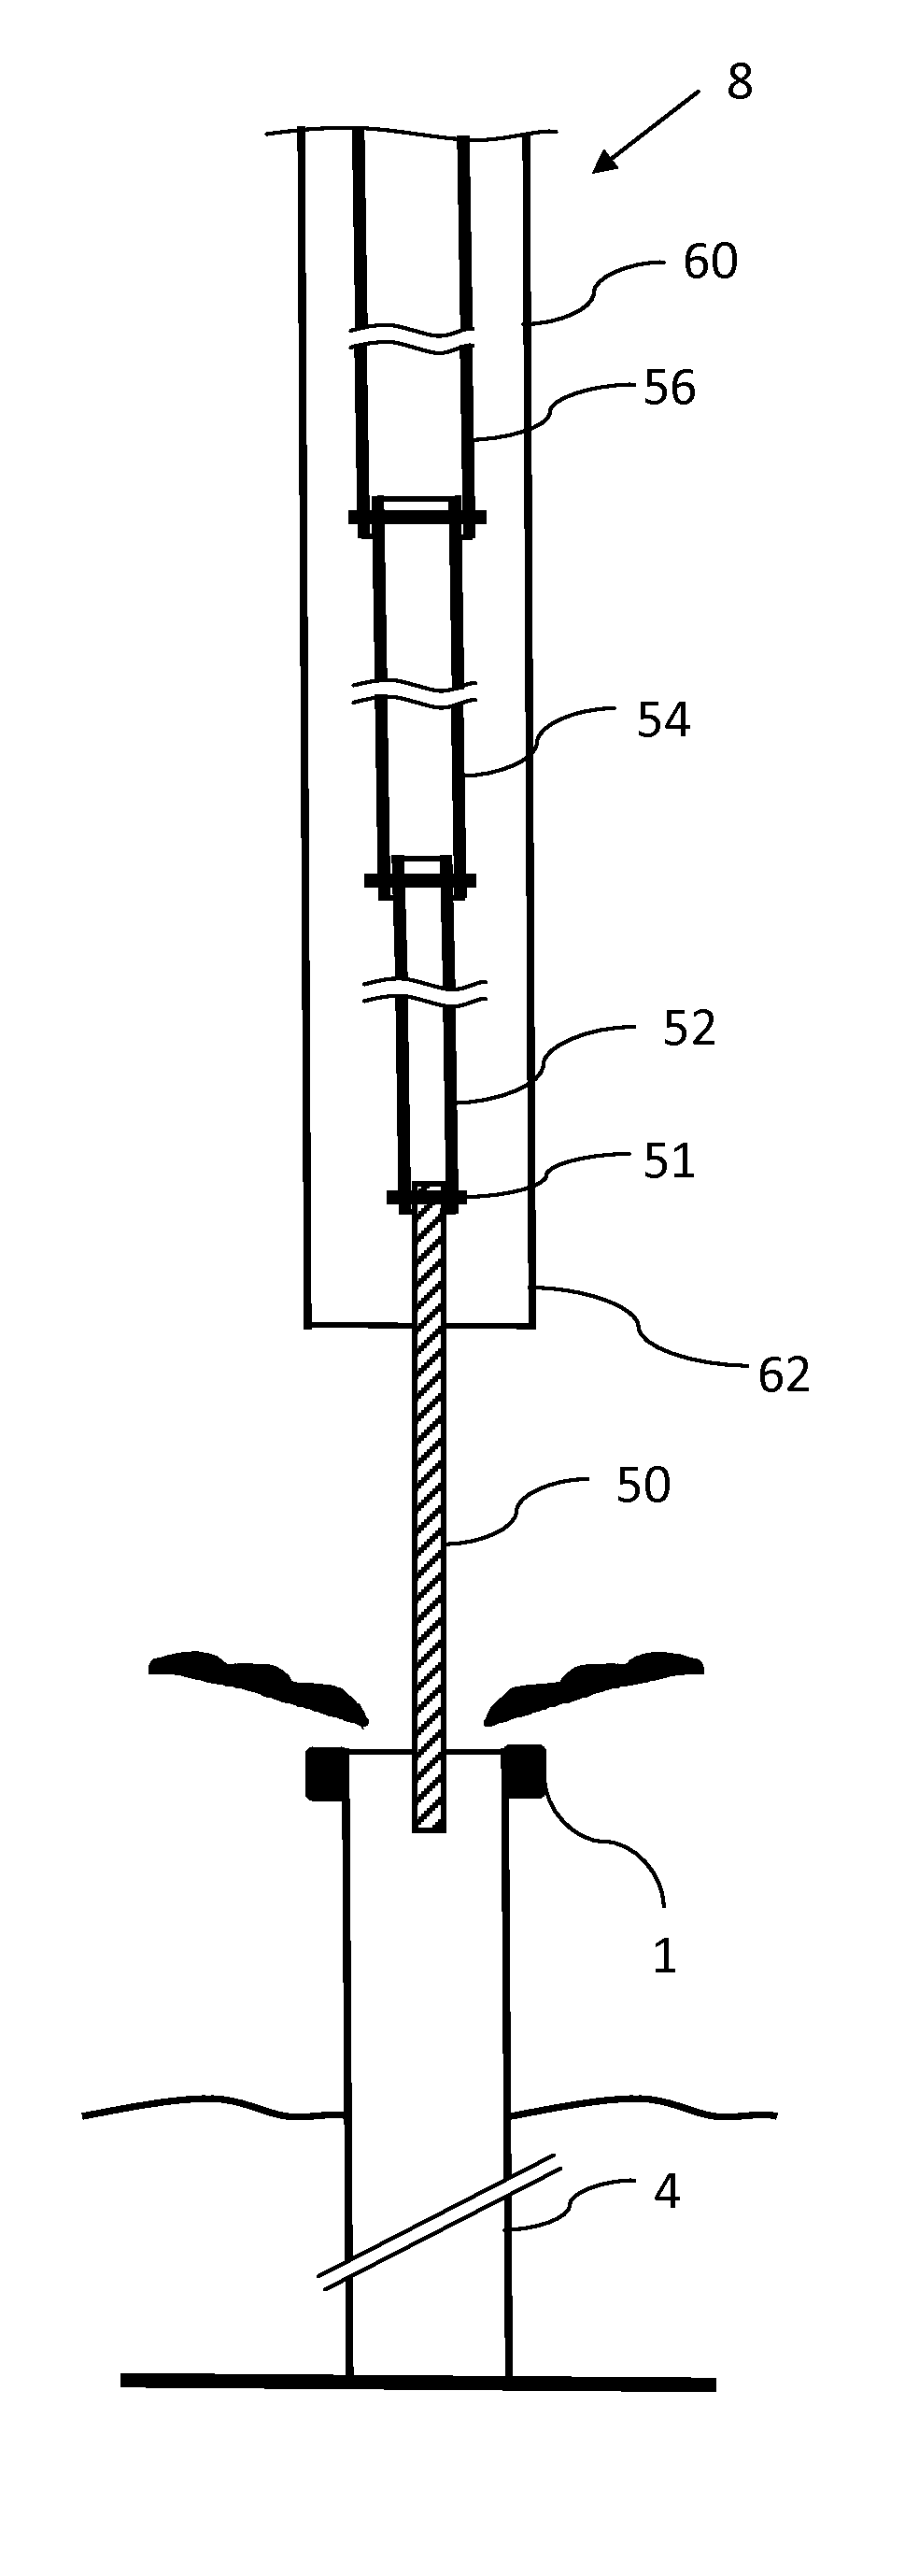 Methods and devices for restoring control and resuming production at an offshore oil well following an uncontrolled fluid release after an explosion